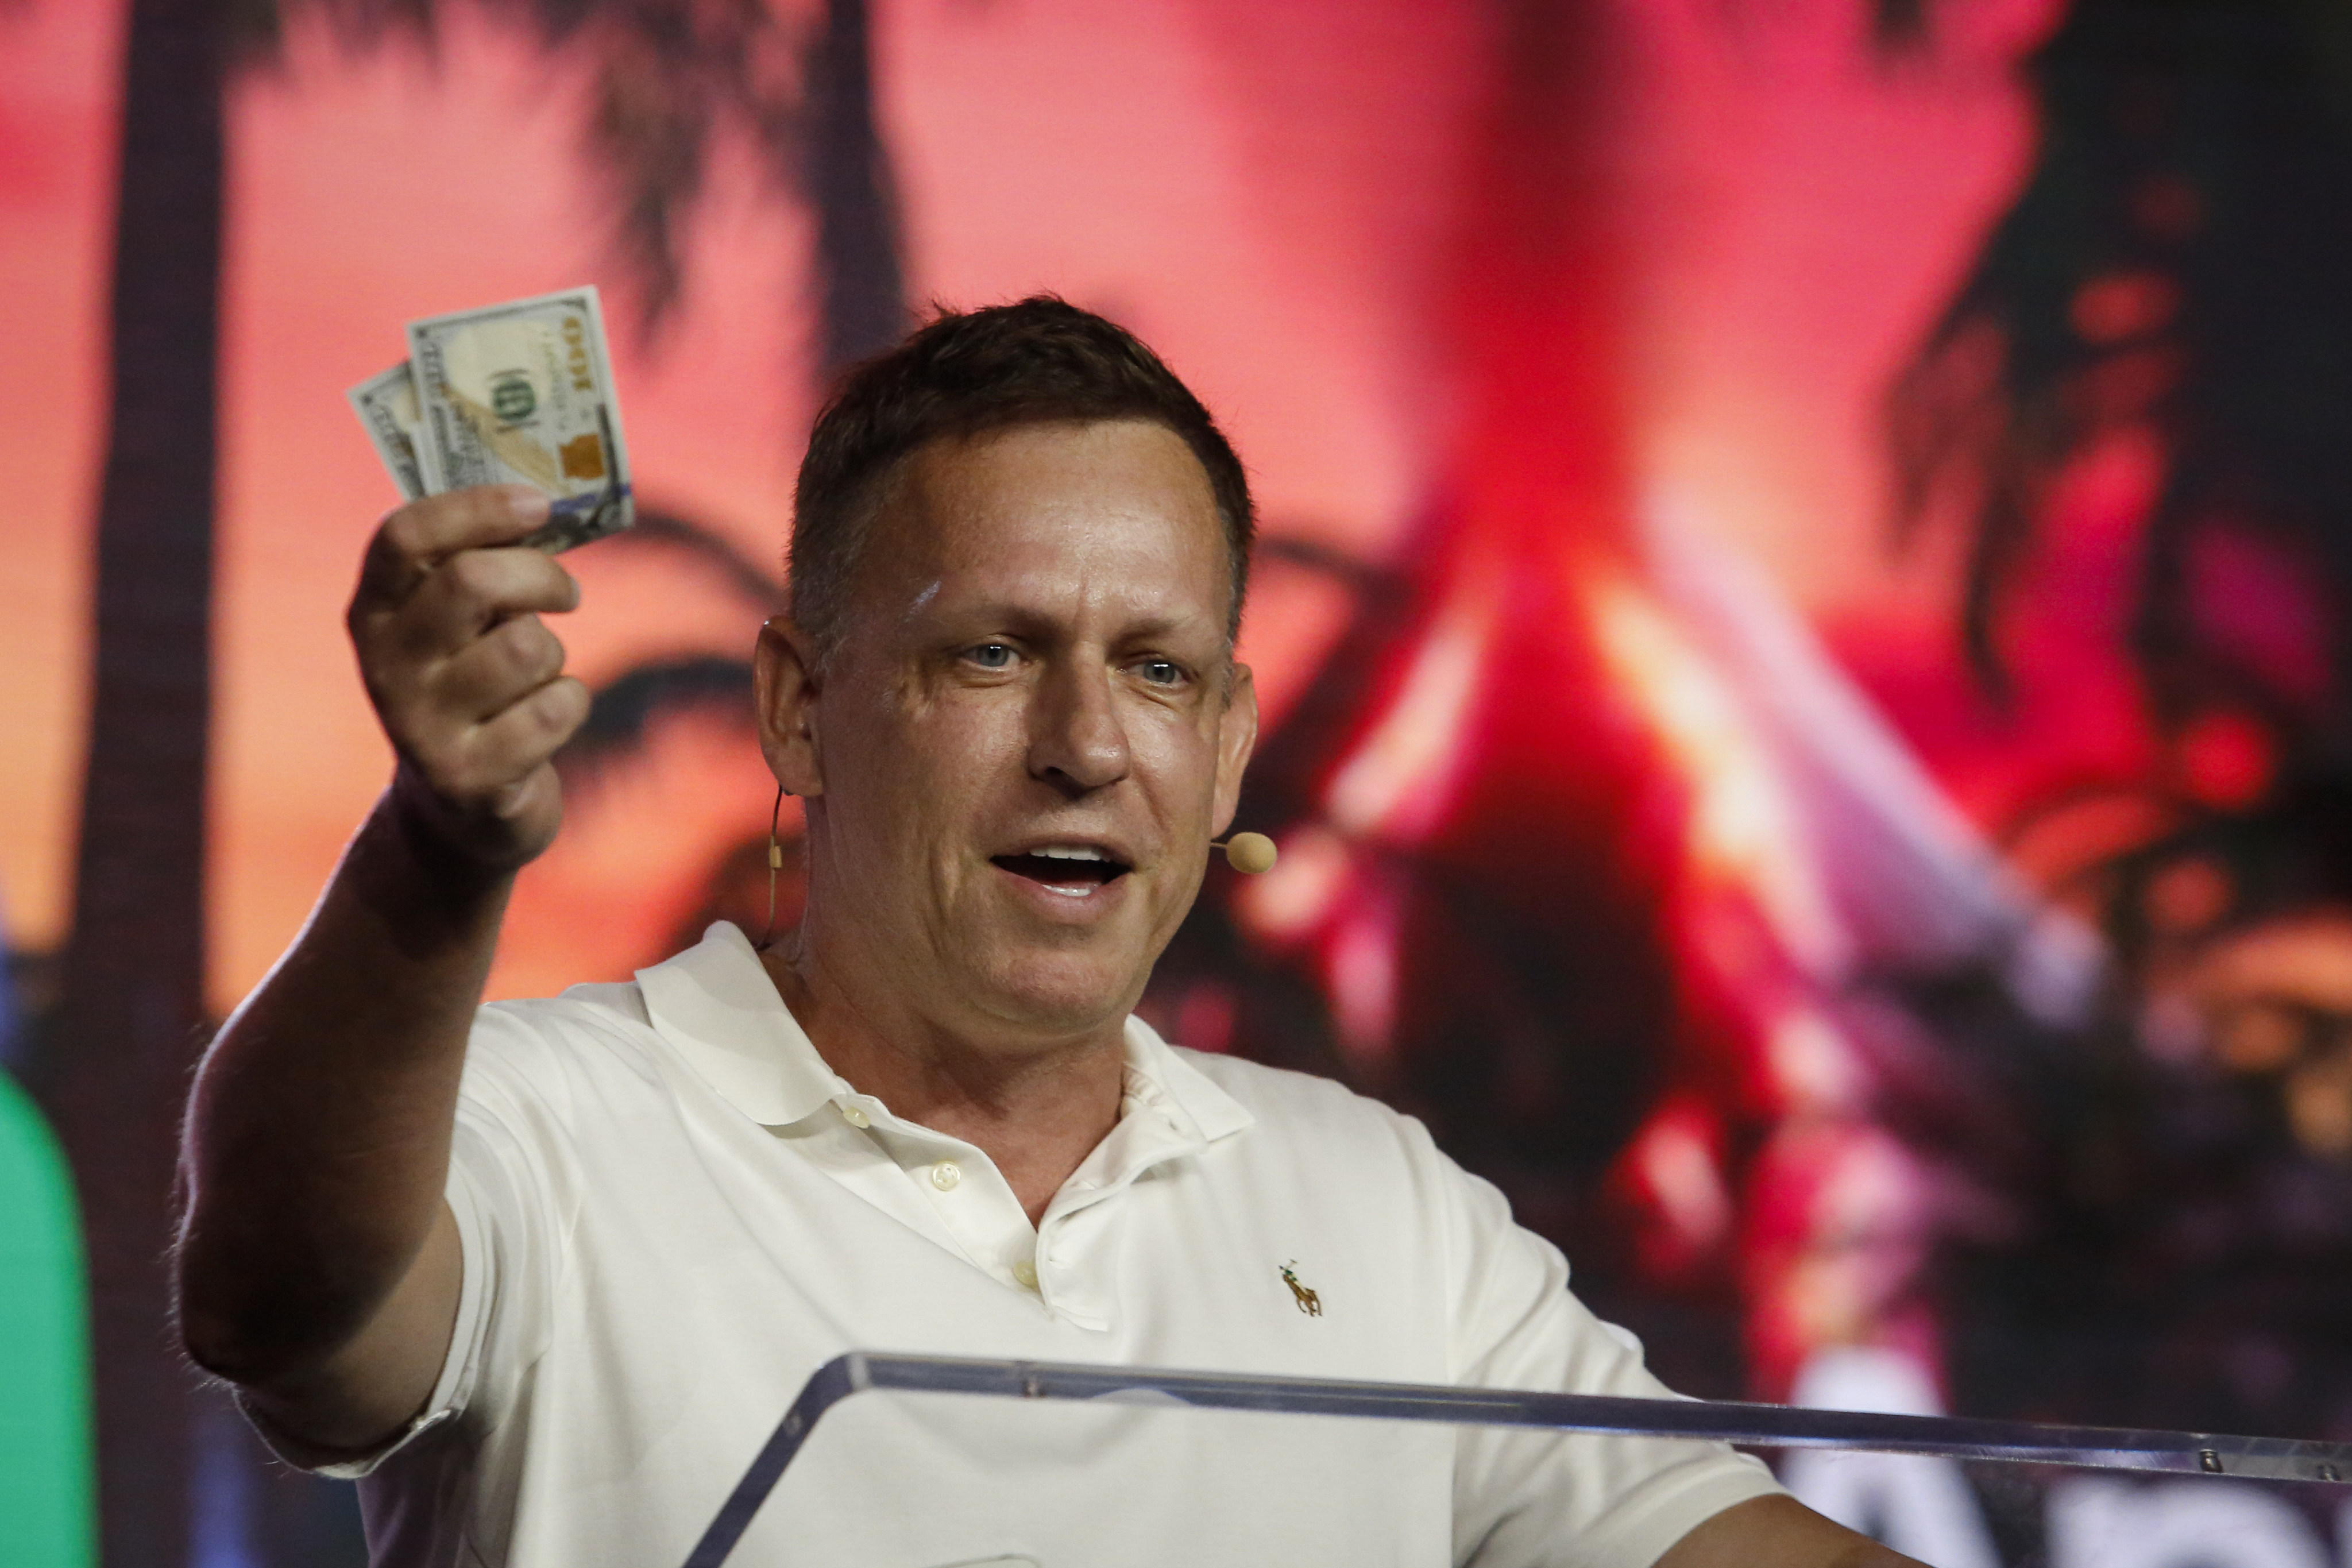 Peter Thiel, co-founder of PayPal, is not planning to donate to any political candidates in 2024, according to two people close to the businessman. Photo: Getty Images